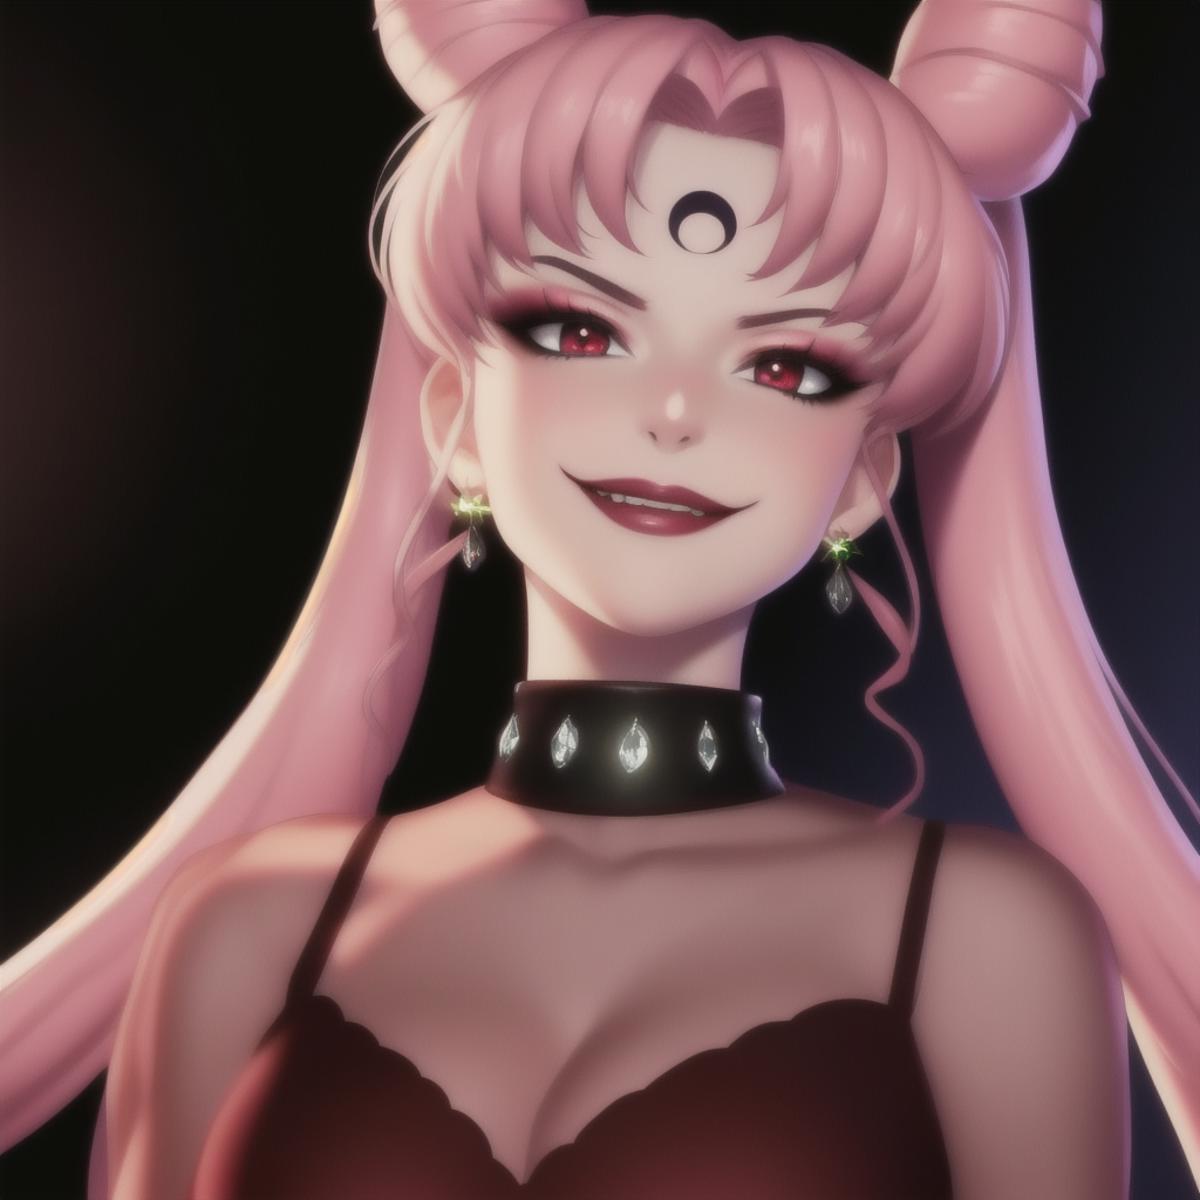 Black Lady (from Sailor Moon) image by knuthead783